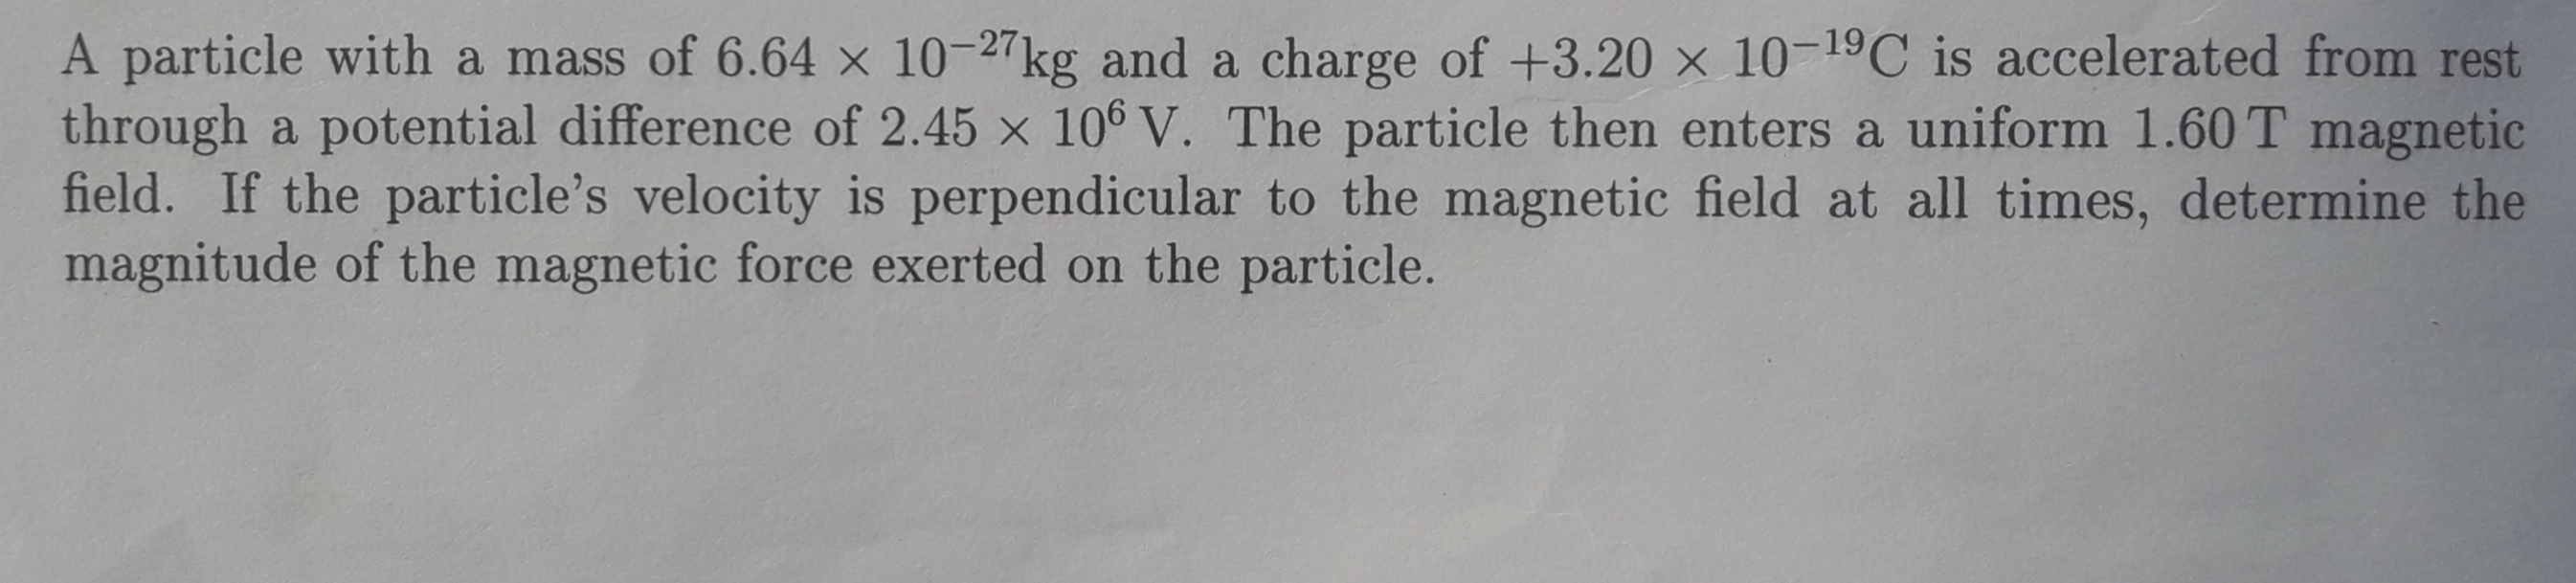 A particle with a mass of 6.64 × 10-27kg and a charge of +3.20 x 10-19C is accelerated from rest
through a potential difference of 2.45 x 10° V. The particle then enters a uniform 1.60 T magnetic
field. If the particle's velocity is perpendicular to the magnetic field at all times, determine the
magnitude of the magnetic force exerted on the particle.
